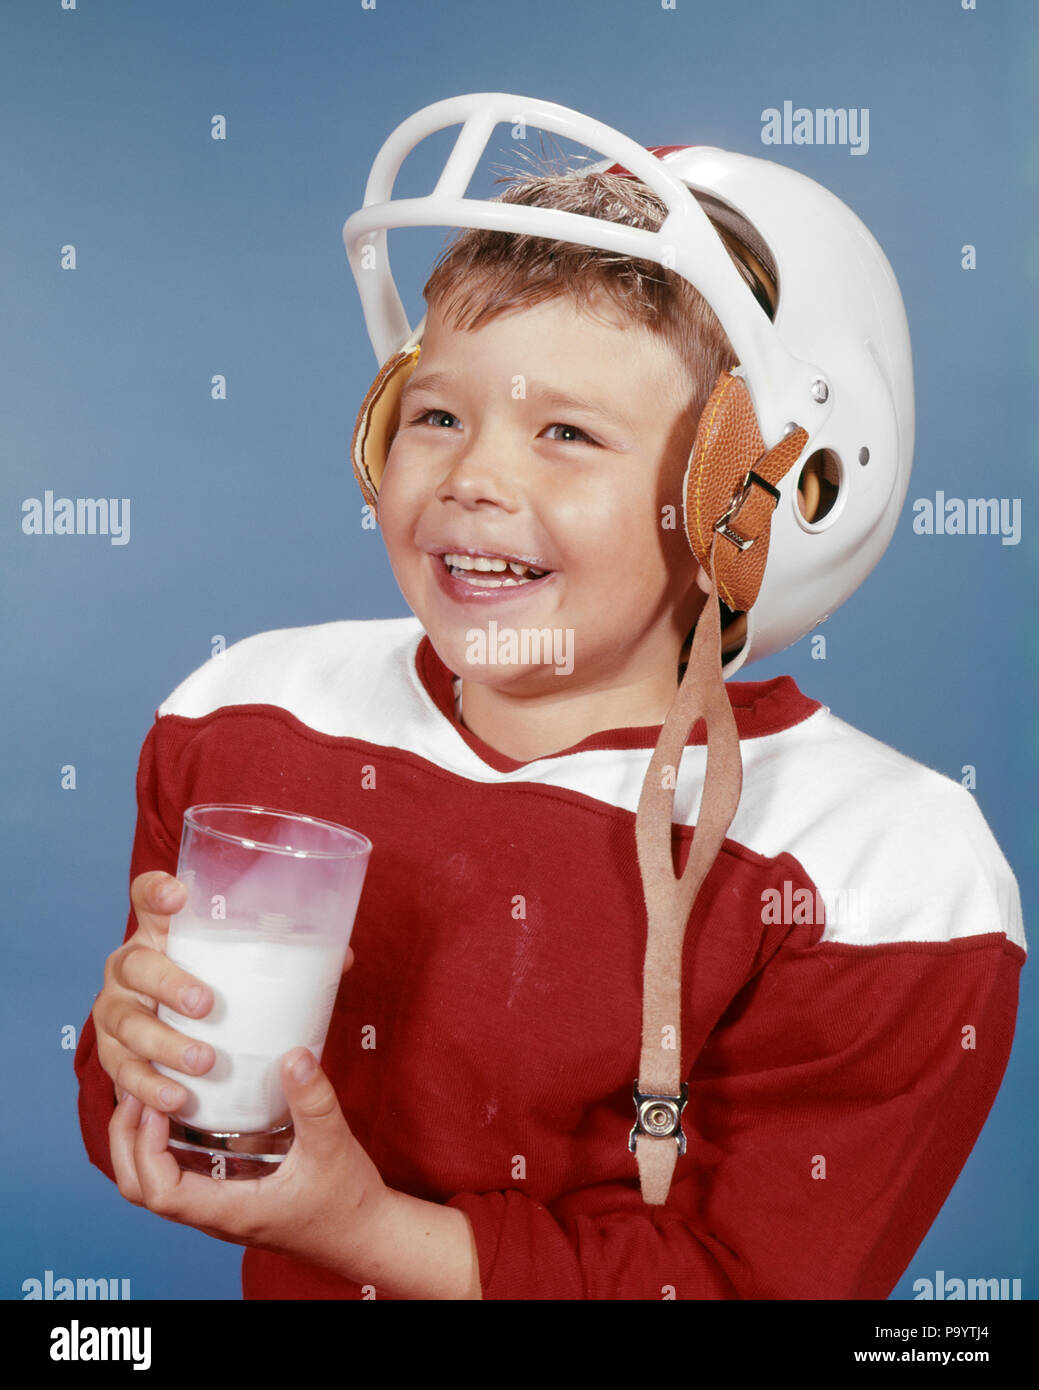 1960s SMILING BOY DRINKING MILK WEARING FOOTBALL UNIFORM AND HELMET RED JERSEY  - kf2991 HAR001 HARS PLEASED JOY HEALTHINESS HOME LIFE COPY SPACE FRIENDSHIP HALF-LENGTH PHYSICAL FITNESS MALES EXPRESSIONS HAPPINESS CHEERFUL BEVERAGE PROTECTION AND NUTRITION RECREATION SMILES JOYFUL STYLISH NUTRITIOUS GROWTH JUVENILES CAUCASIAN ETHNICITY HAR001 OLD FASHIONED Stock Photo